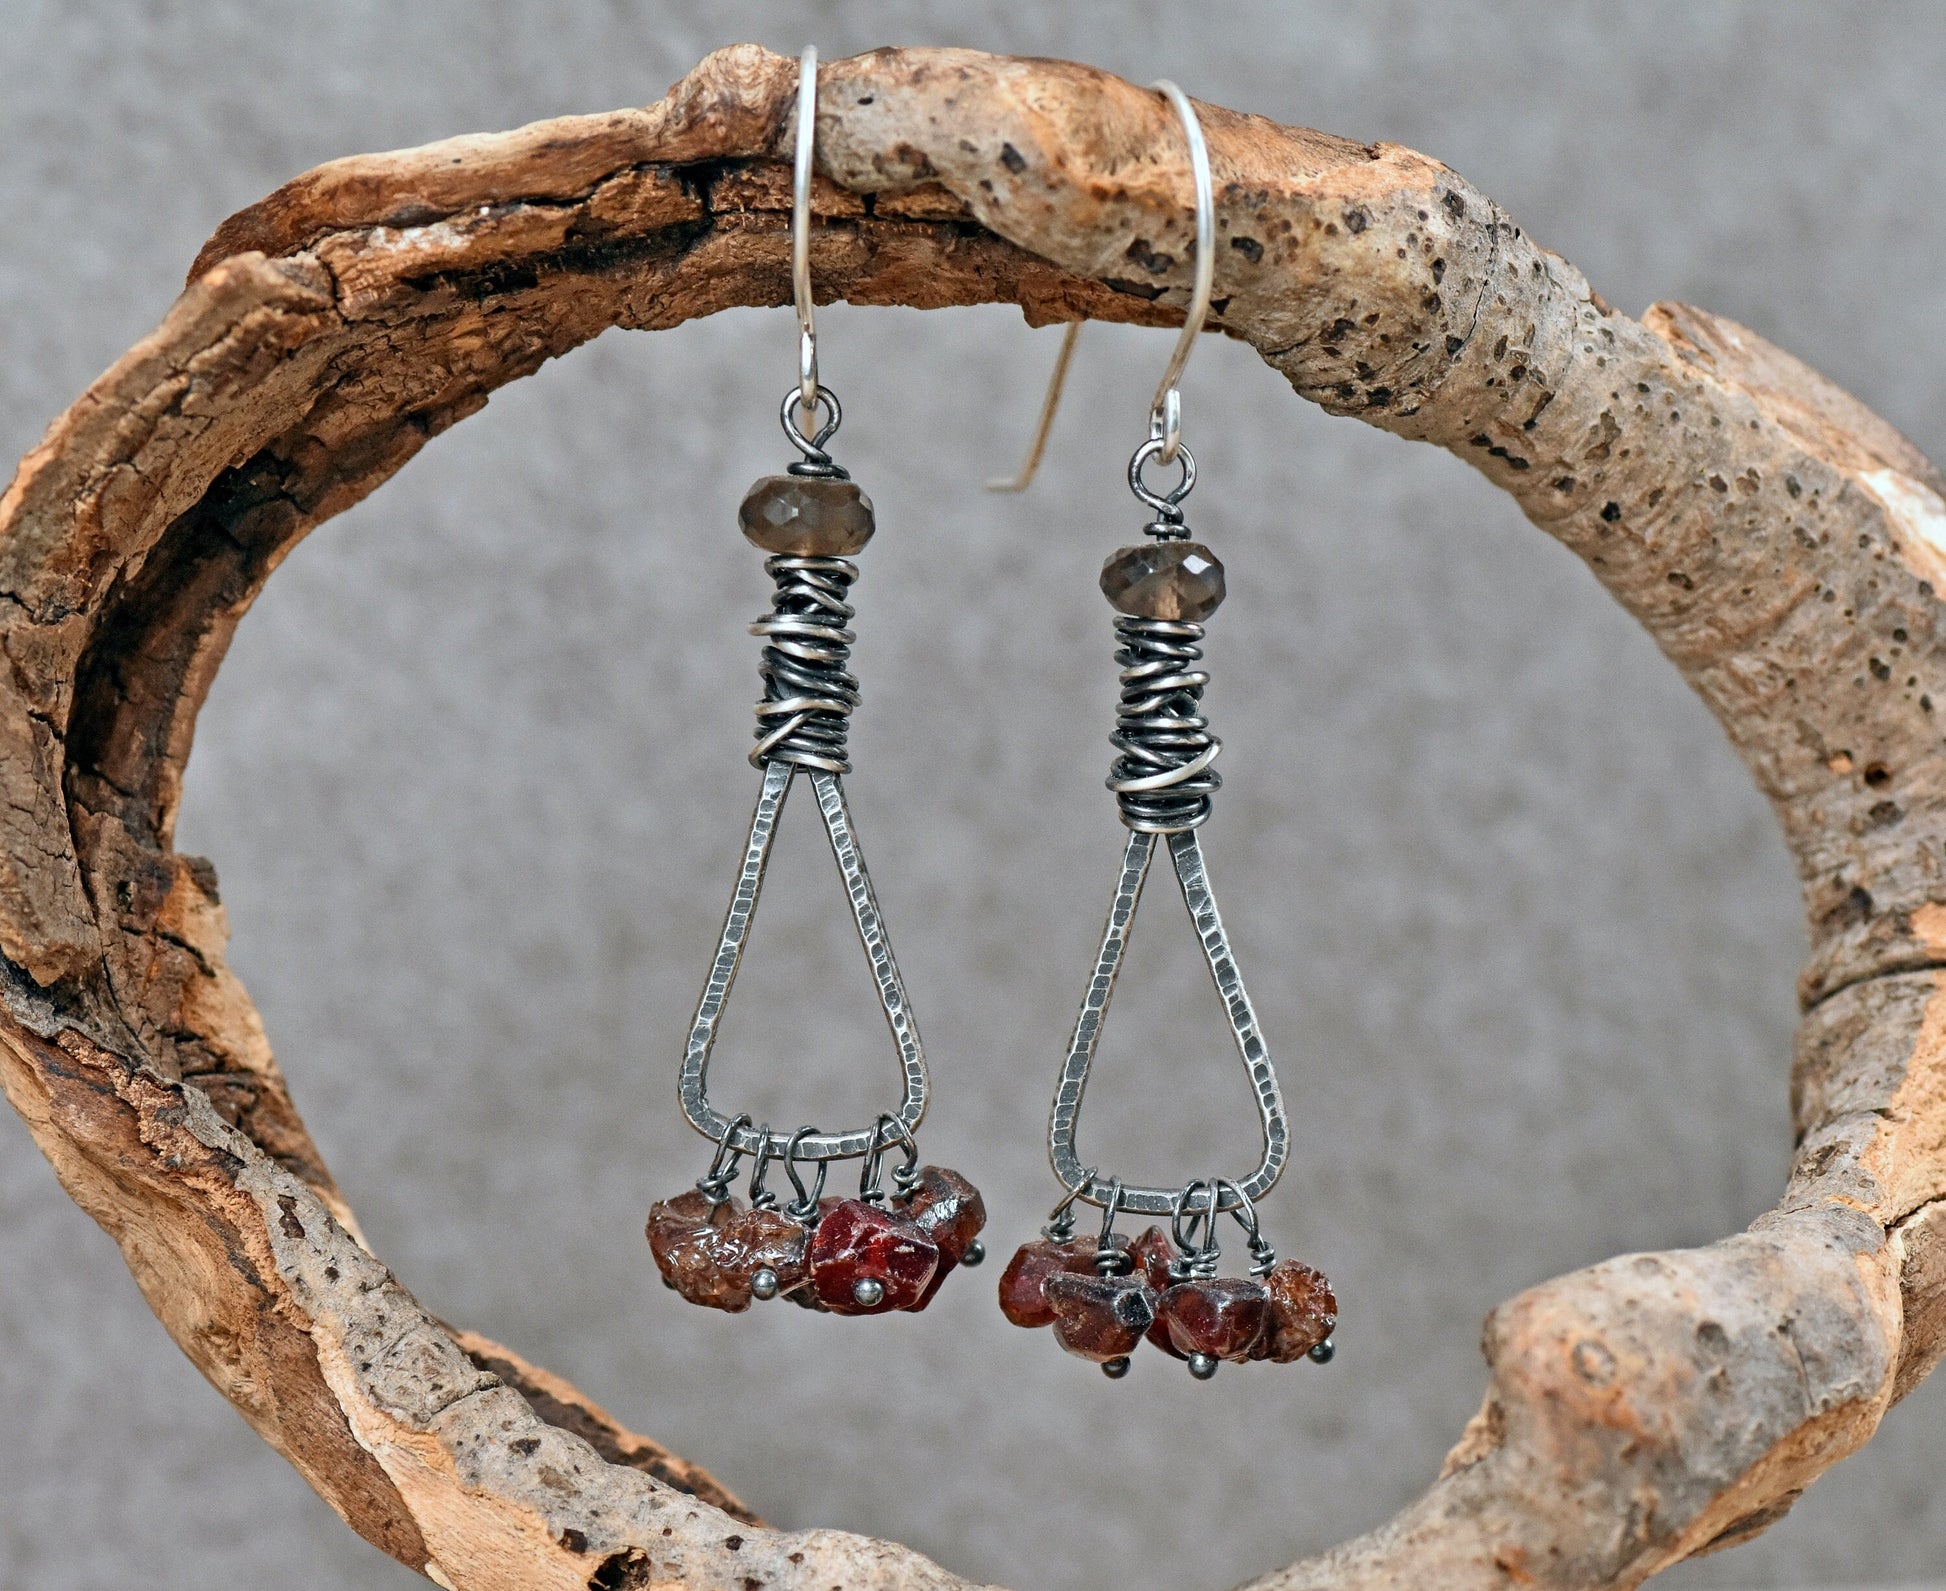 Smoky Quartz and Zircon Earrings Sterling Silver, Gray and Dark Red Gemstone Dangles, Messy Wire Wrap Triangle, Natural Stone Jewelry